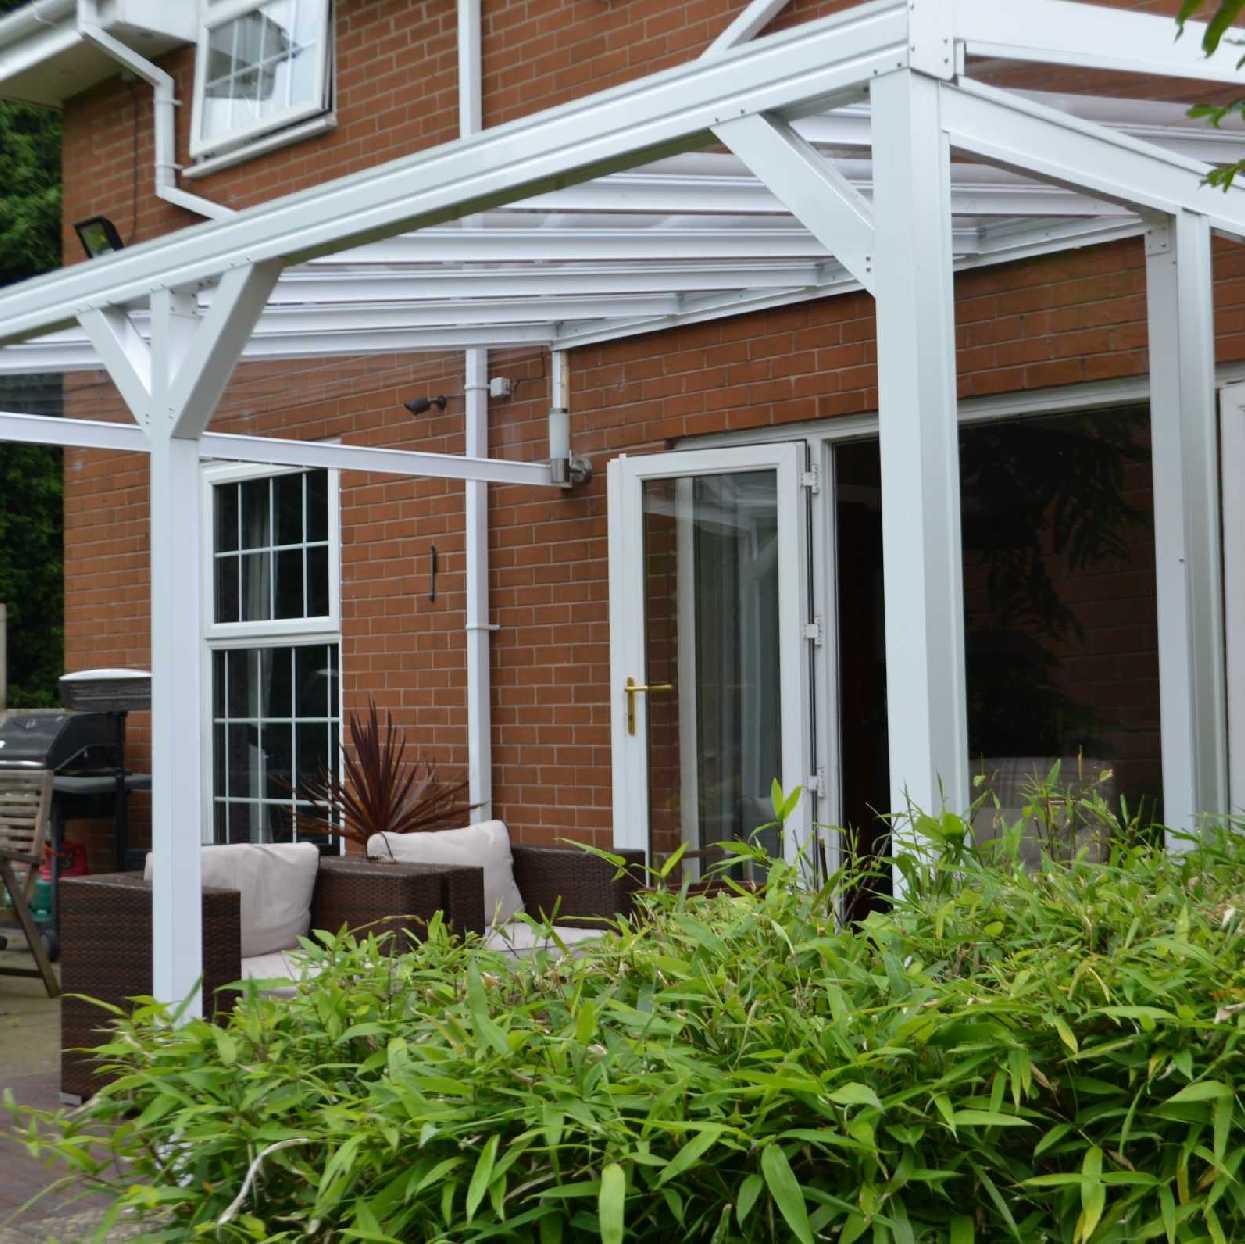 Omega Smart Lean-To Canopy, White UNGLAZED for 6mm Glazing - 7.0m (W) x 2.5m (P), (4) Supporting Posts from Omega Build